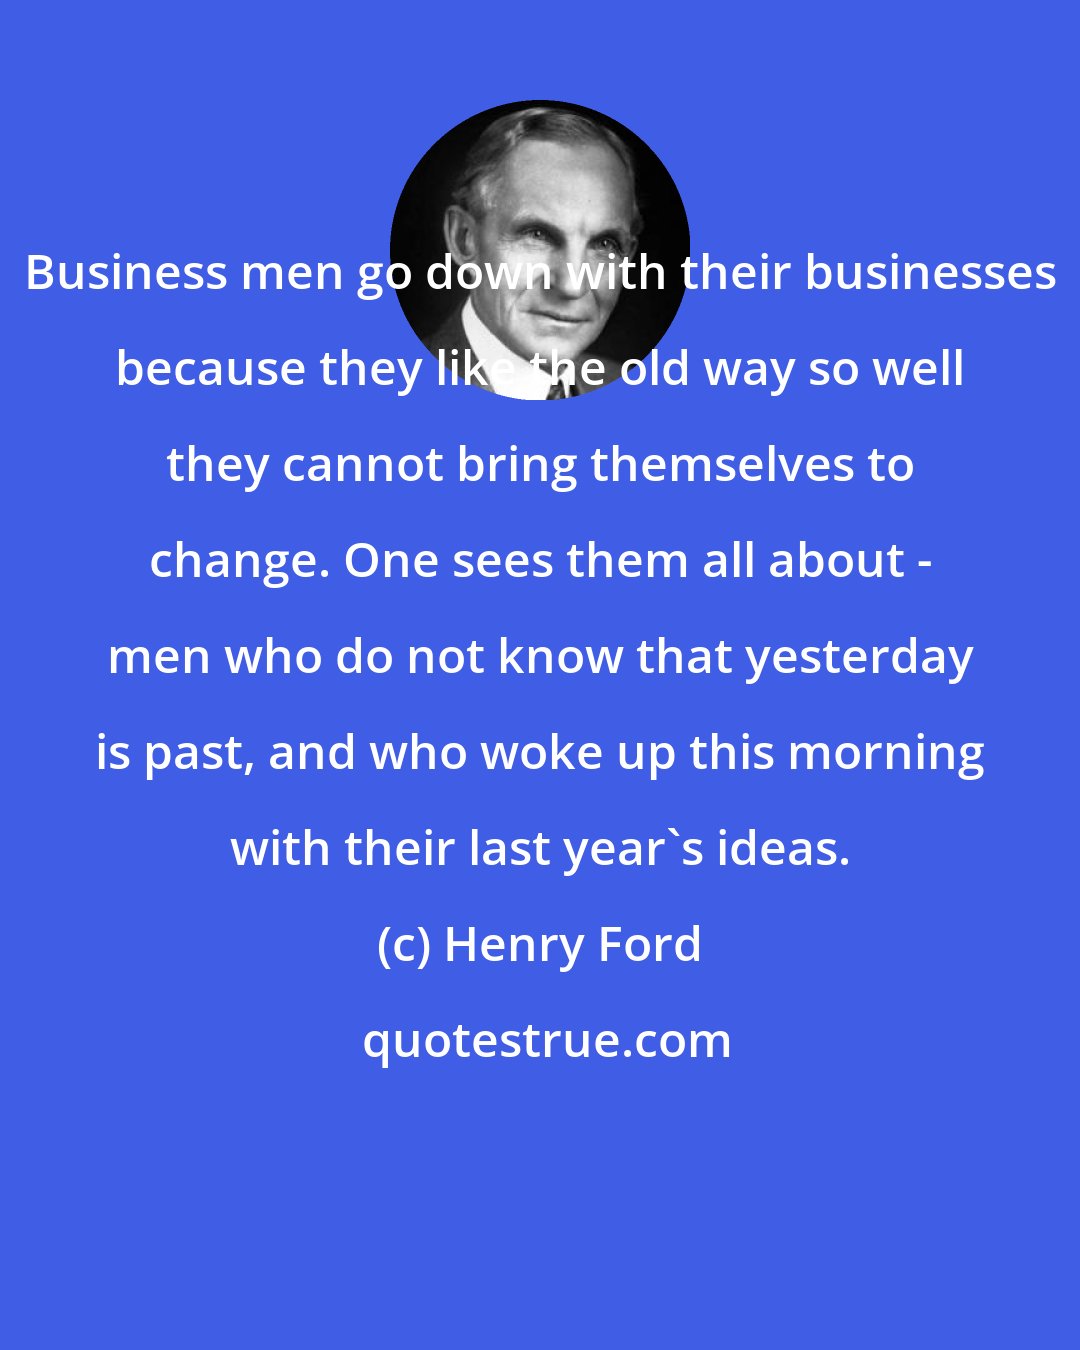 Henry Ford: Business men go down with their businesses because they like the old way so well they cannot bring themselves to change. One sees them all about - men who do not know that yesterday is past, and who woke up this morning with their last year's ideas.